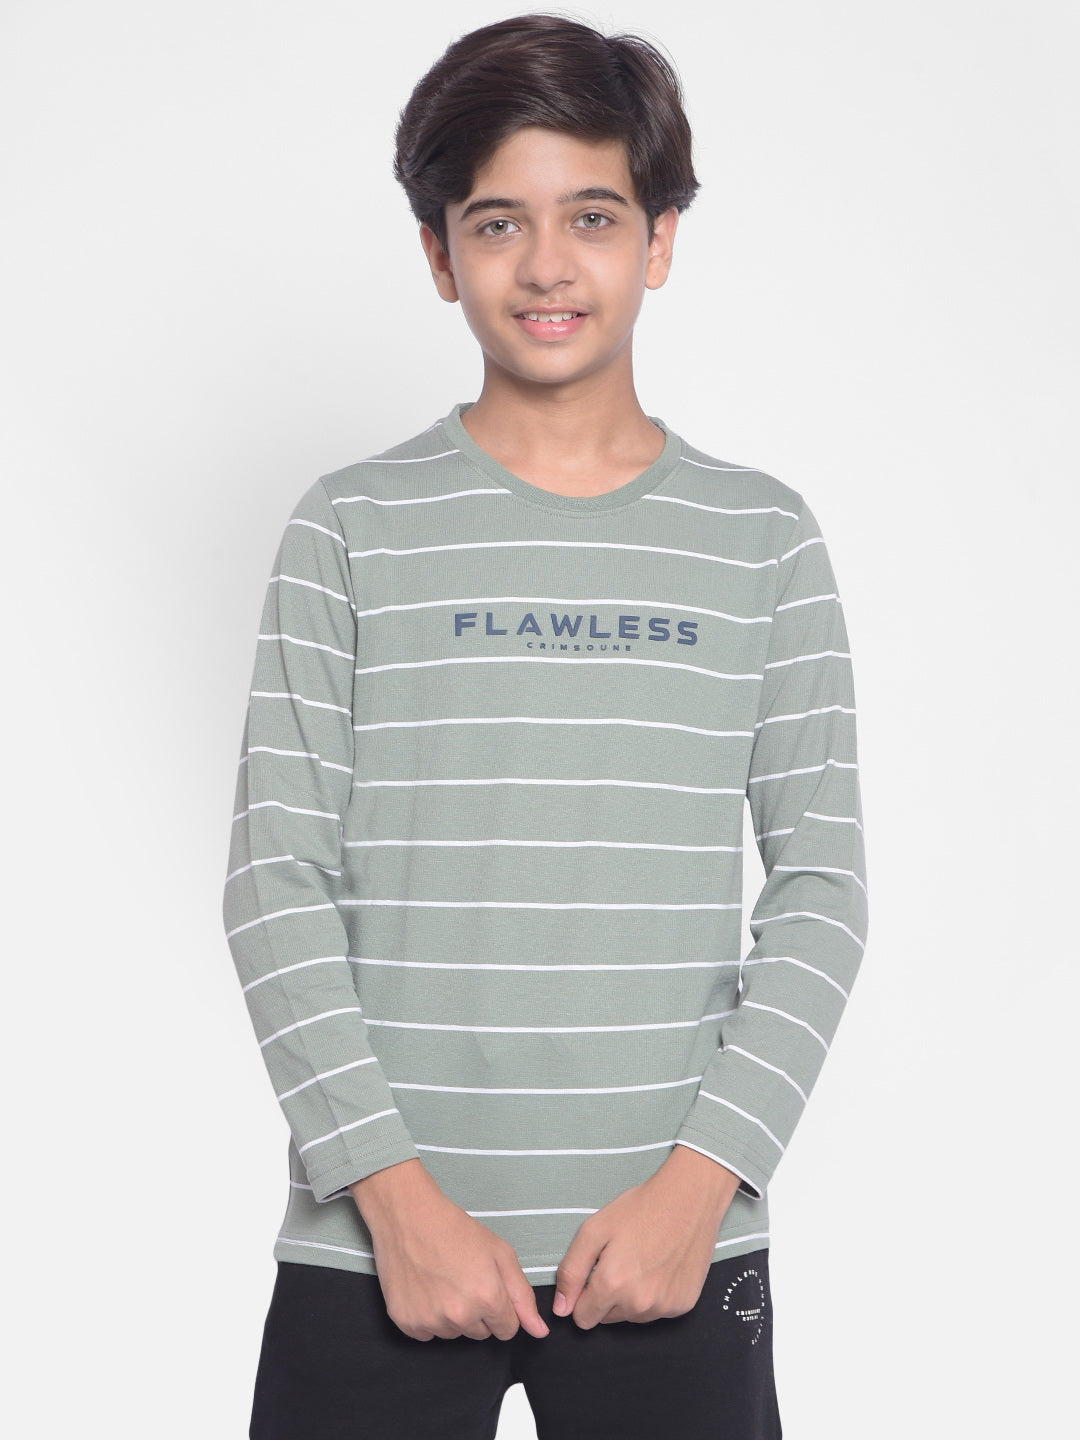 Olive Striped T-shirt With Round Neck Collar-Boys T-shirt-Crimsoune Club